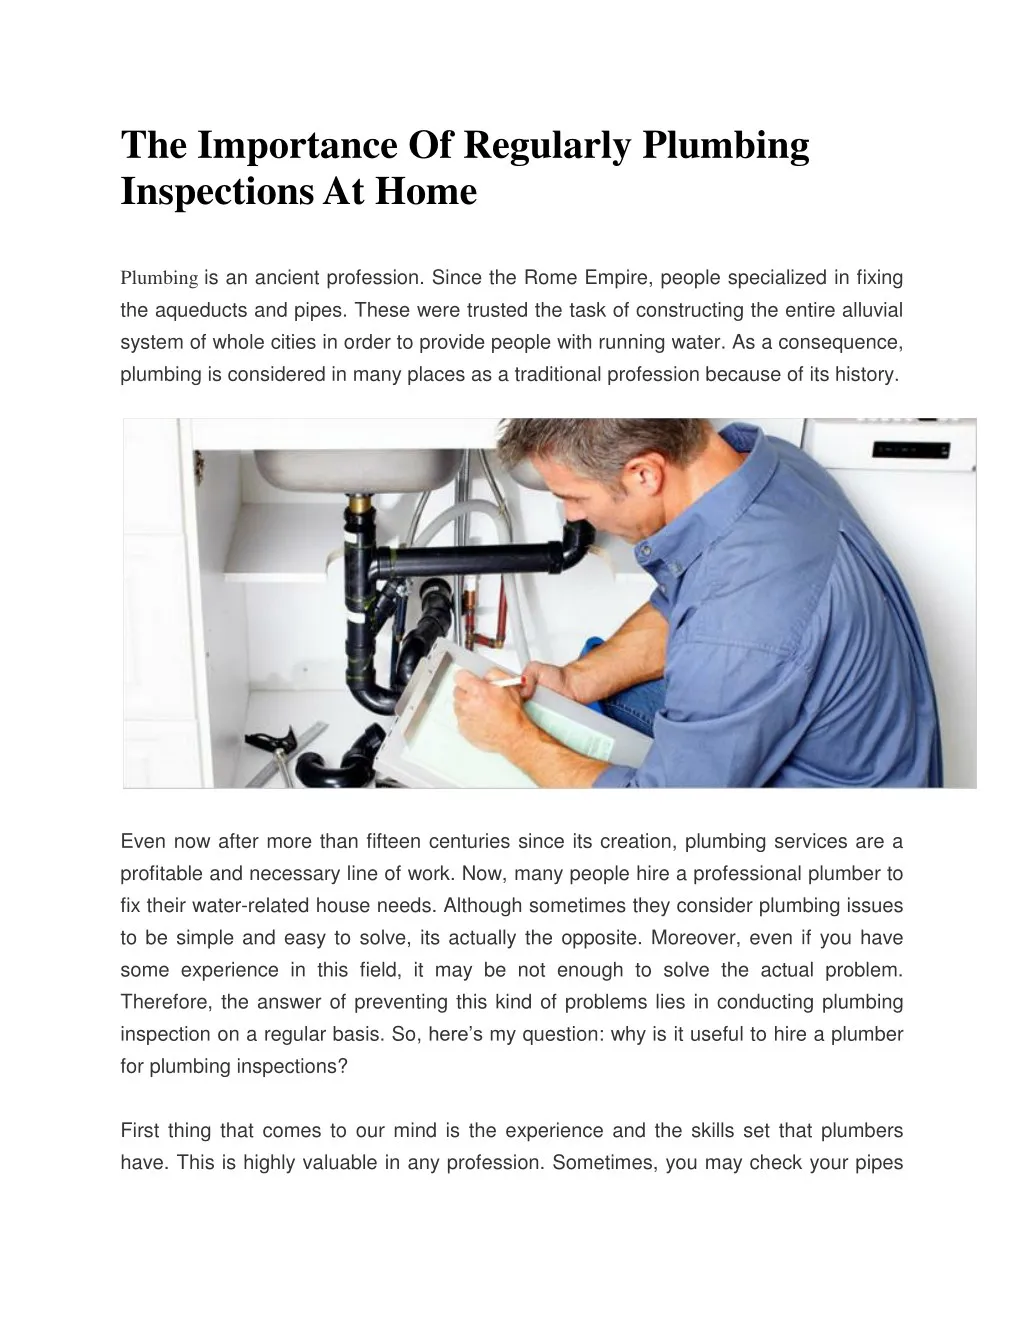 the importance of regularly plumbing inspections